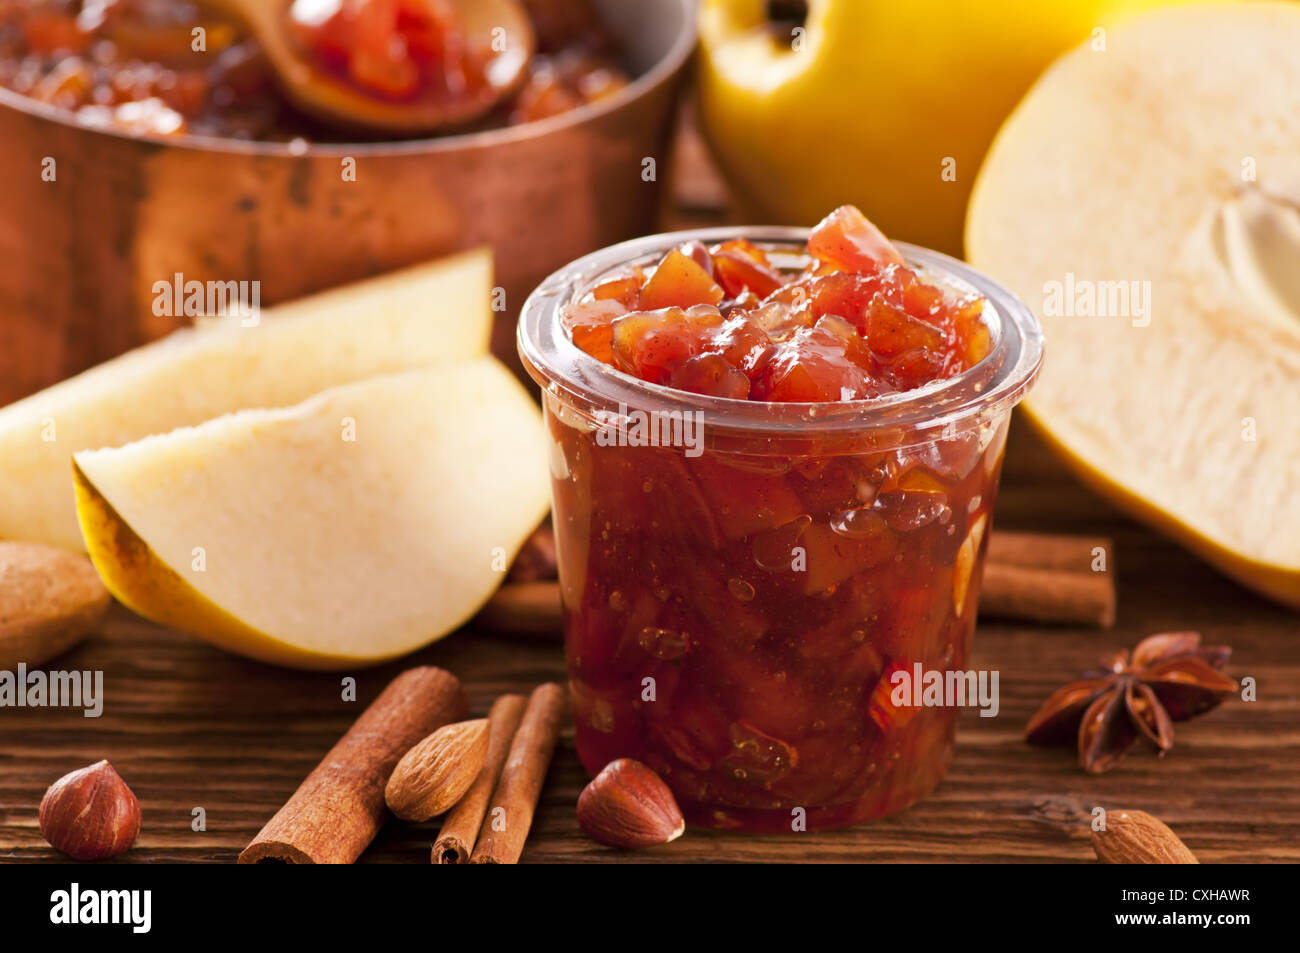 Quince marmalade Stock Photo